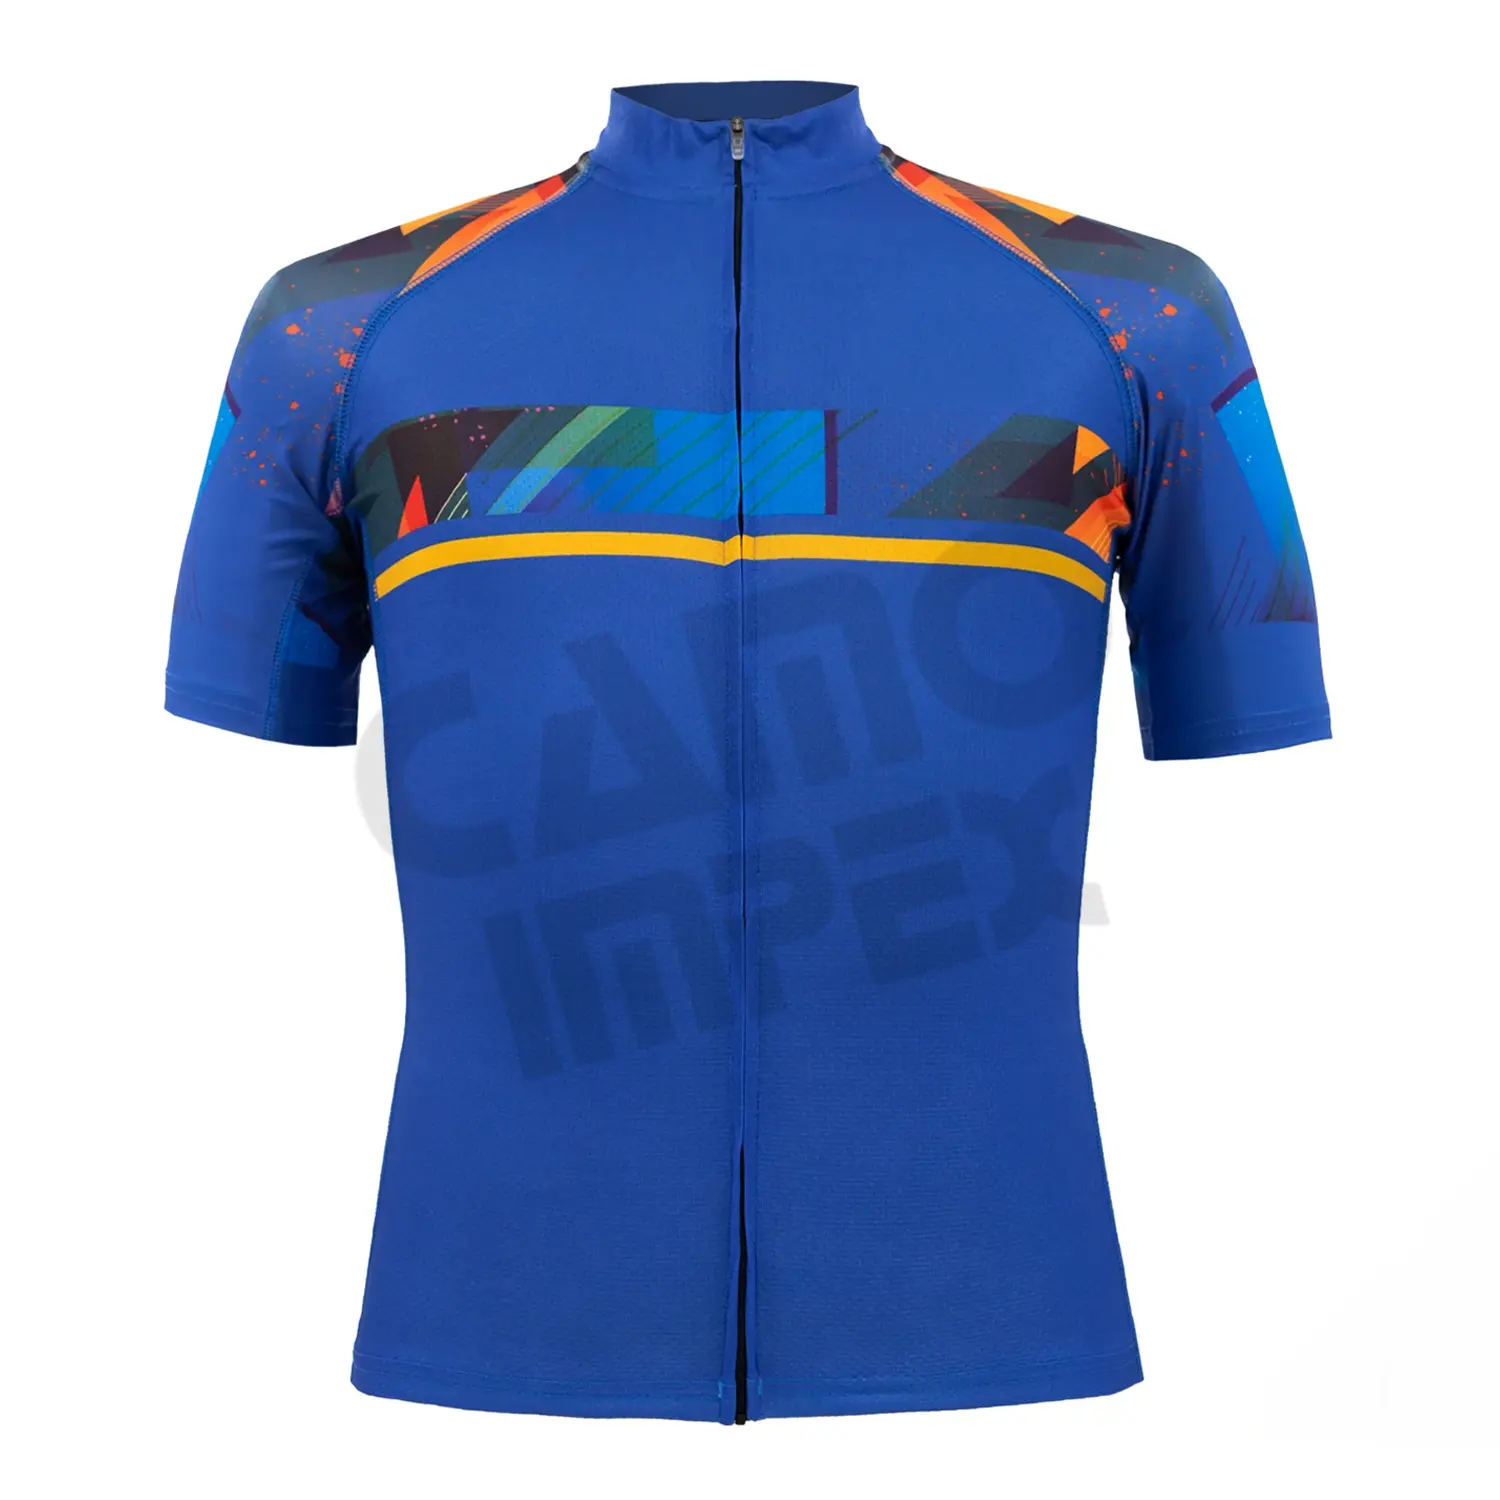 Men Short Sleeves Full Length Fitted Zipper Up Front Recycled Polyester Unique Design Fashion Cycling Jersey New Arrivals Jersey